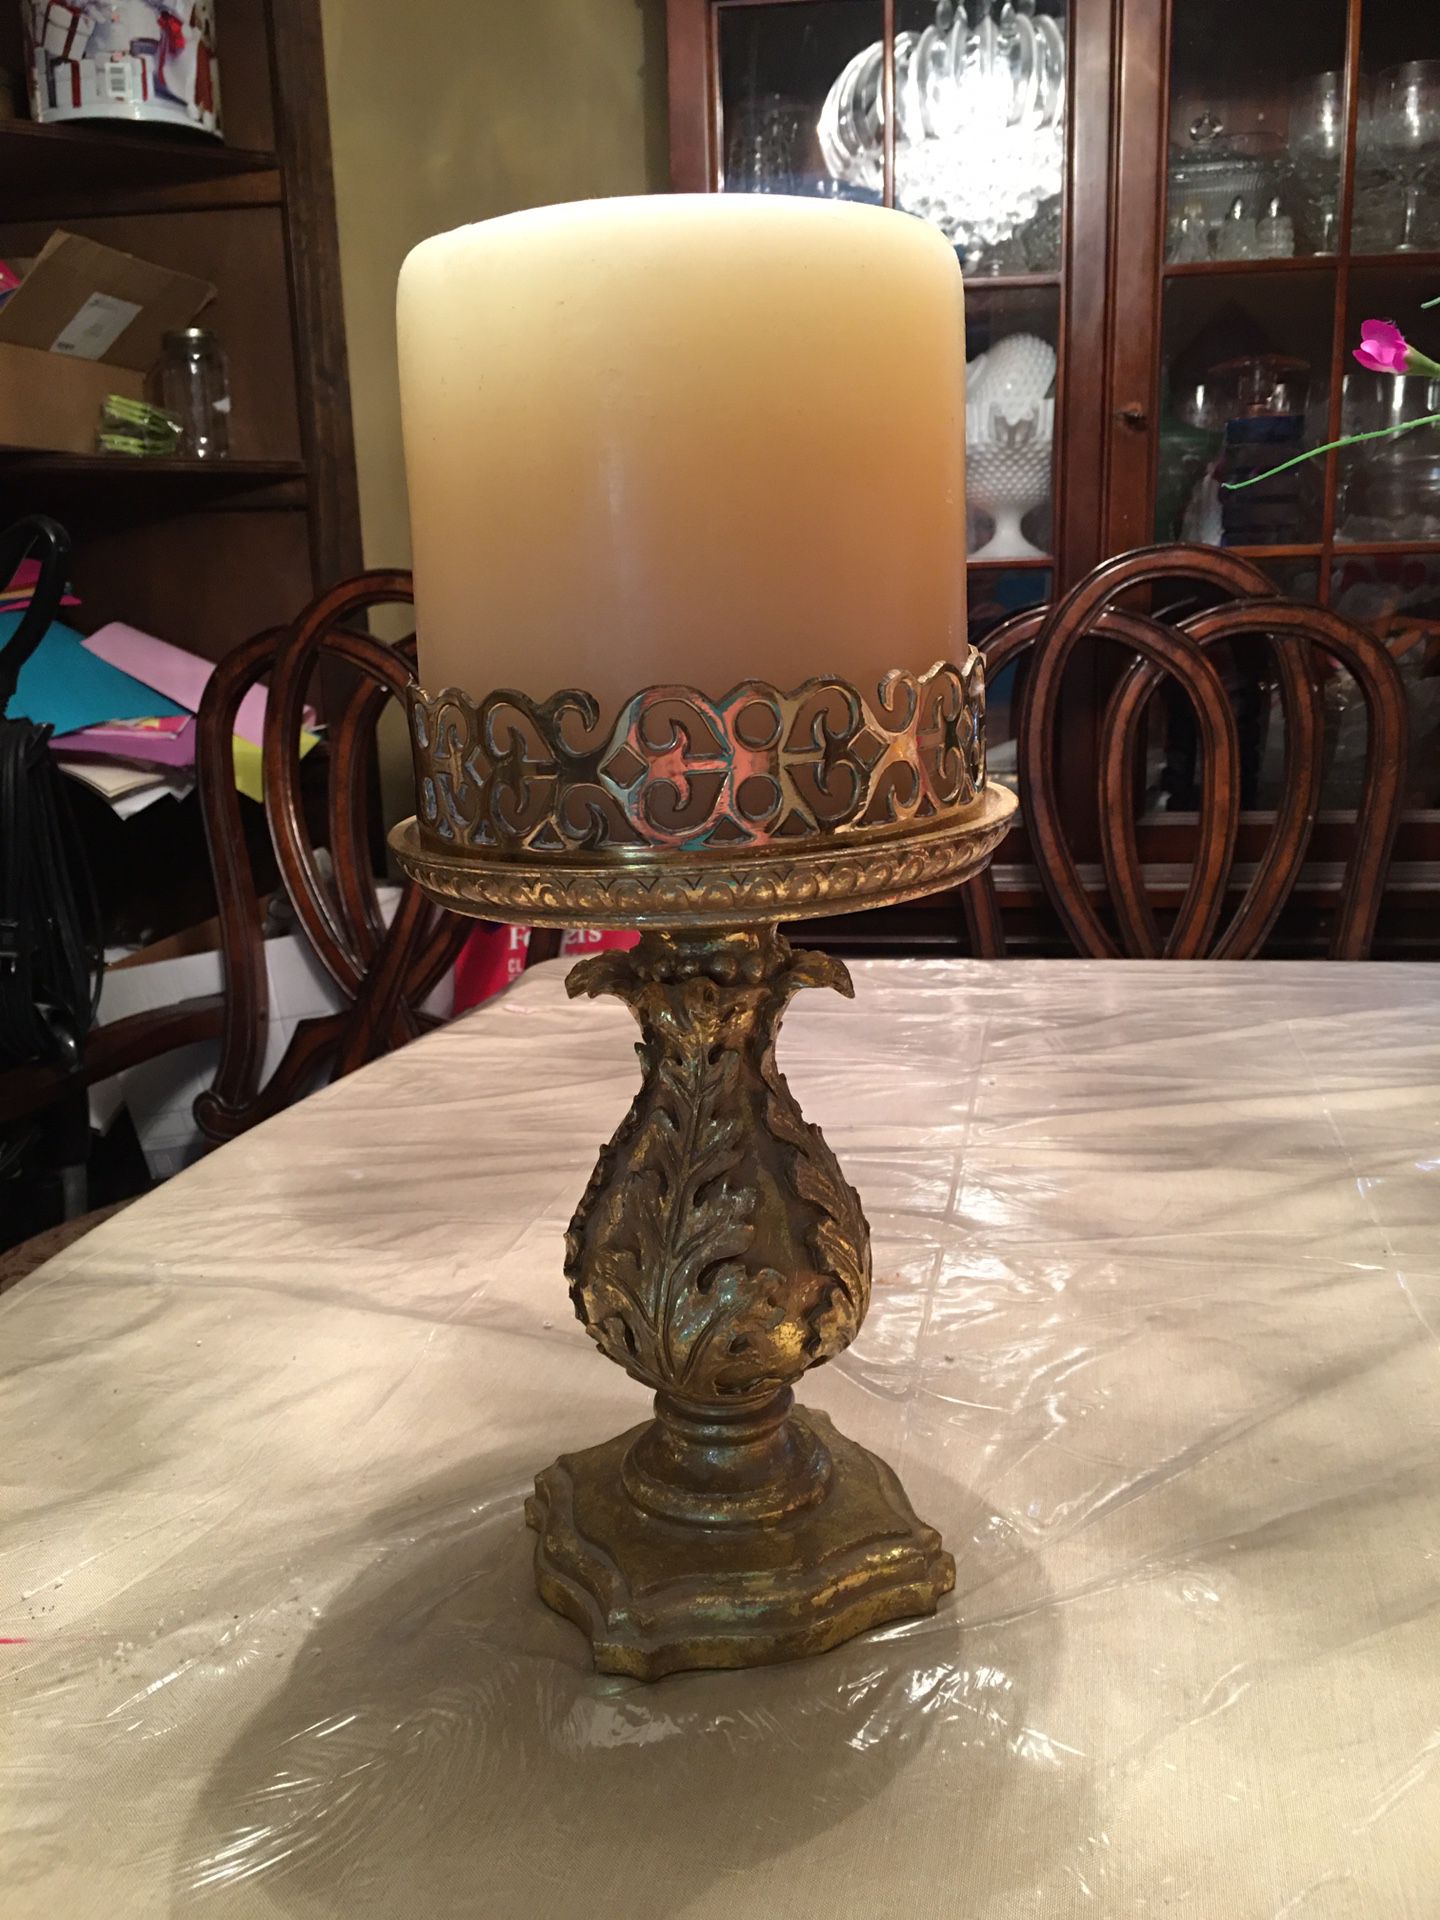 Antique Solid Brass On Wood Candle Holder, 6” Diameter, 12” Standing, Total 26” Height With Candle